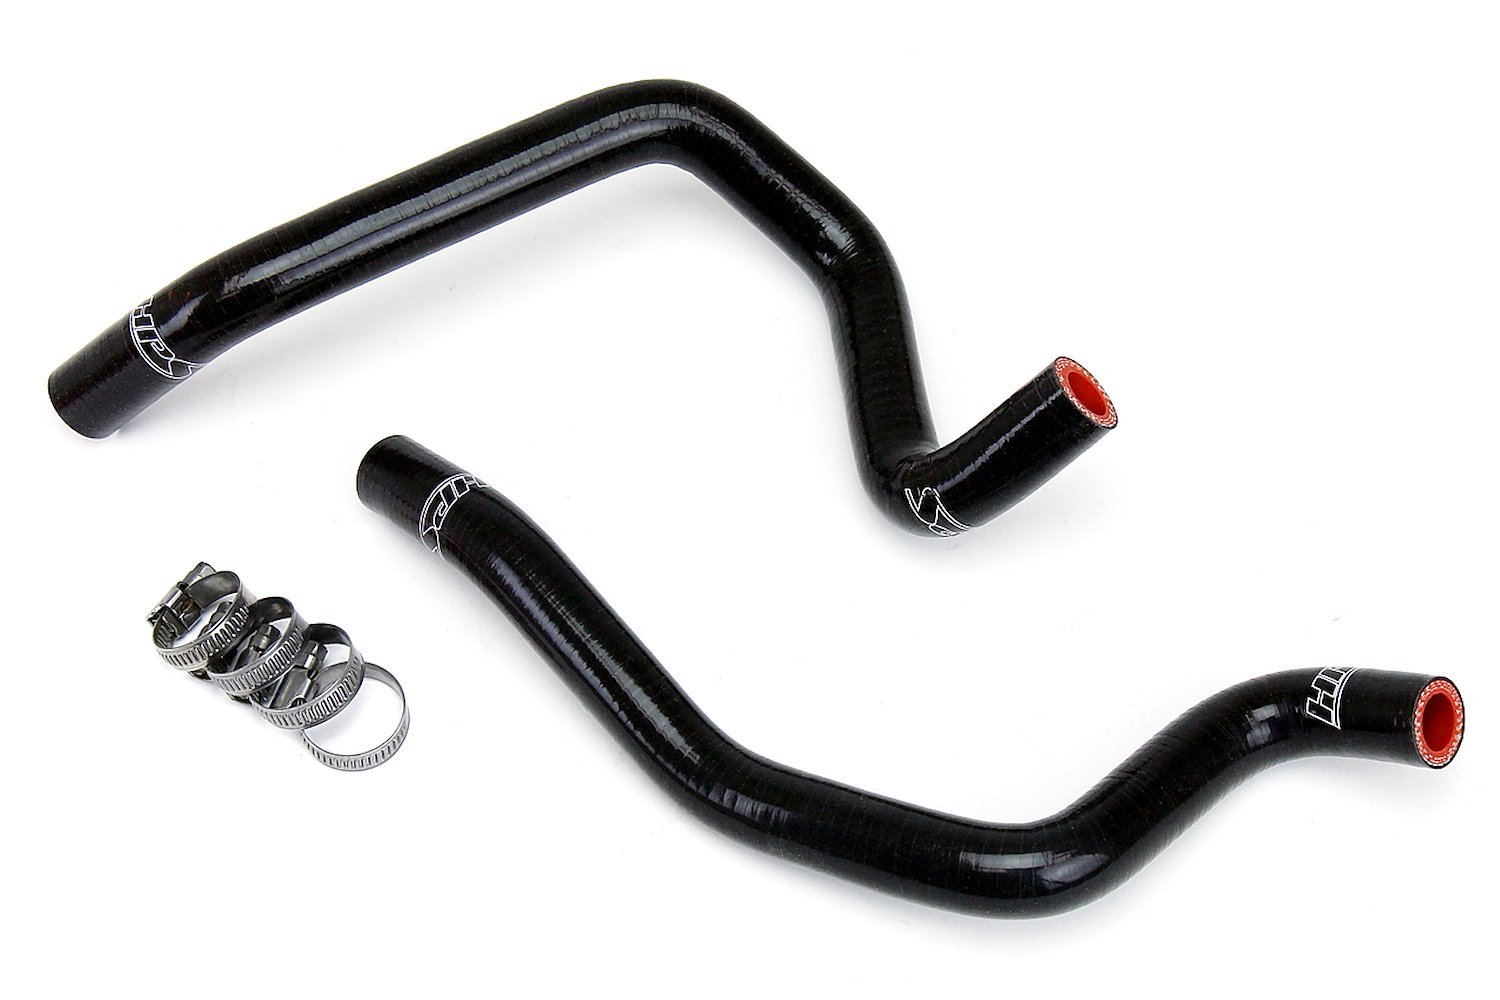 57-1803-BLK Heater Hose Kit, 3-Ply Reinforced Silicone, Replace OEM Rubber Heater Coolant Hoses